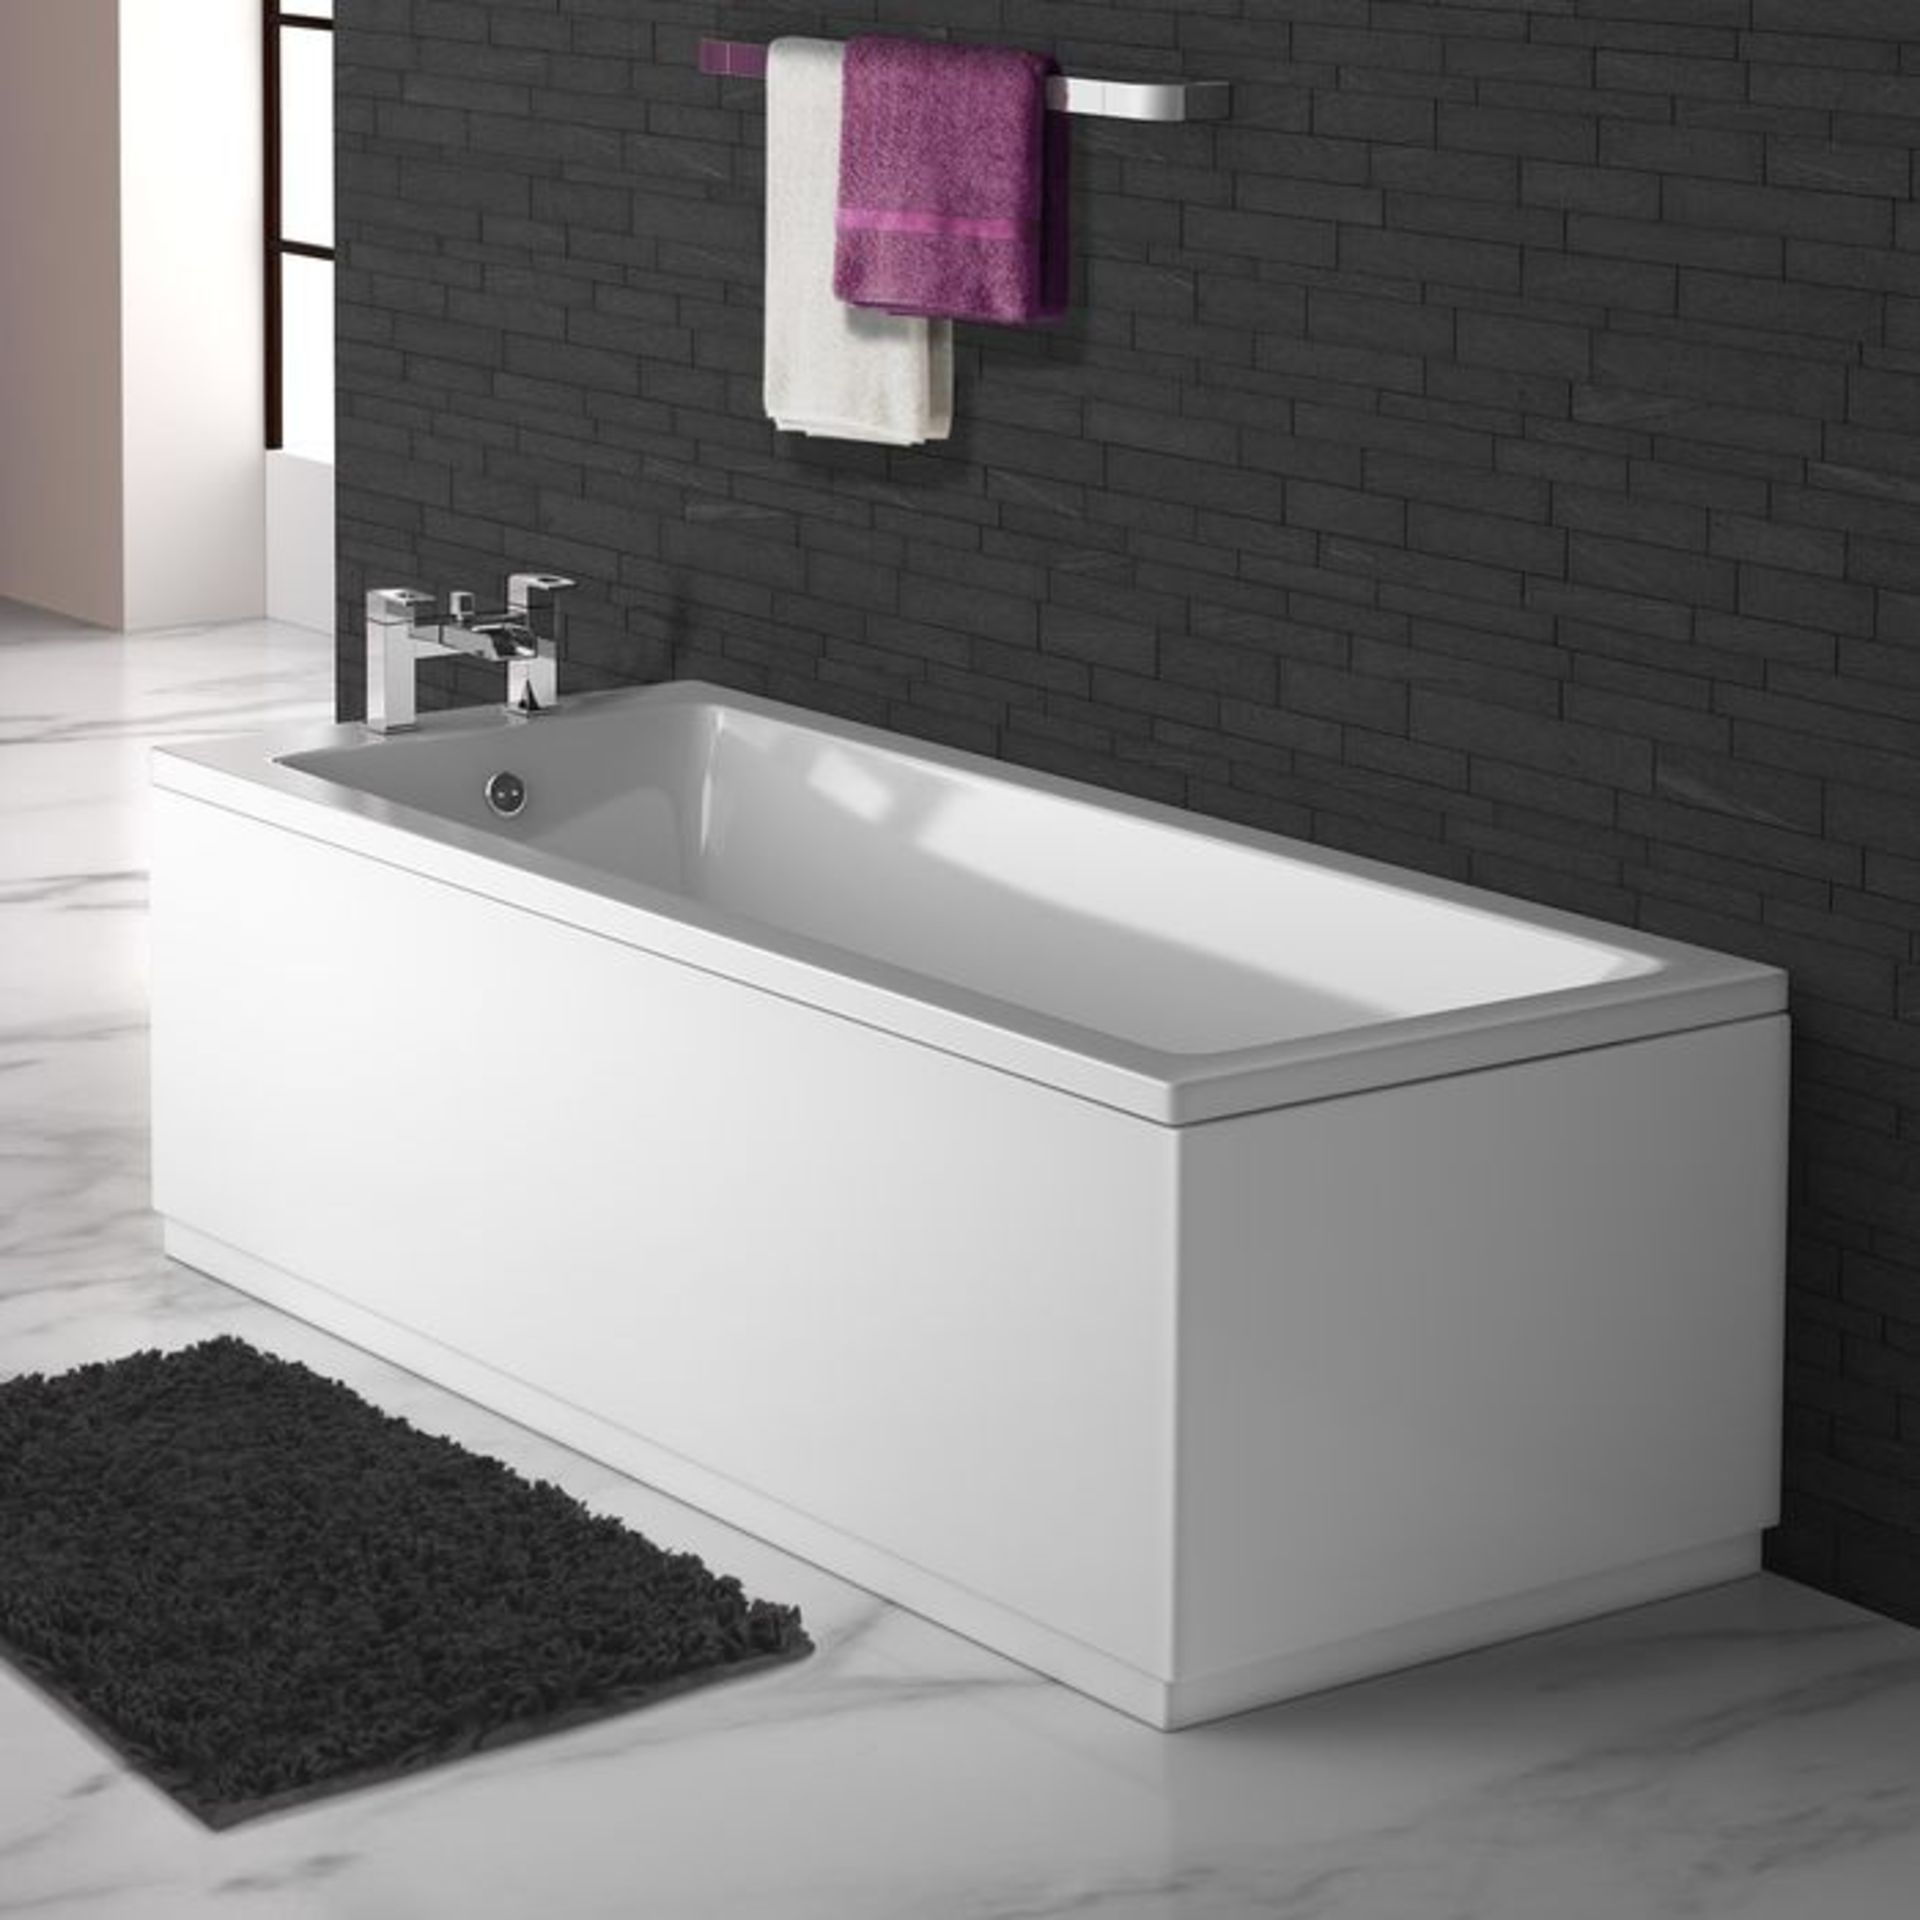 (BATH101) PALLET TO CONTAIN 6 BATHS IN VARIOUS SHAPES & SIZES. APPROX. ORIGINAL RRP VALUE £1,750. Uk